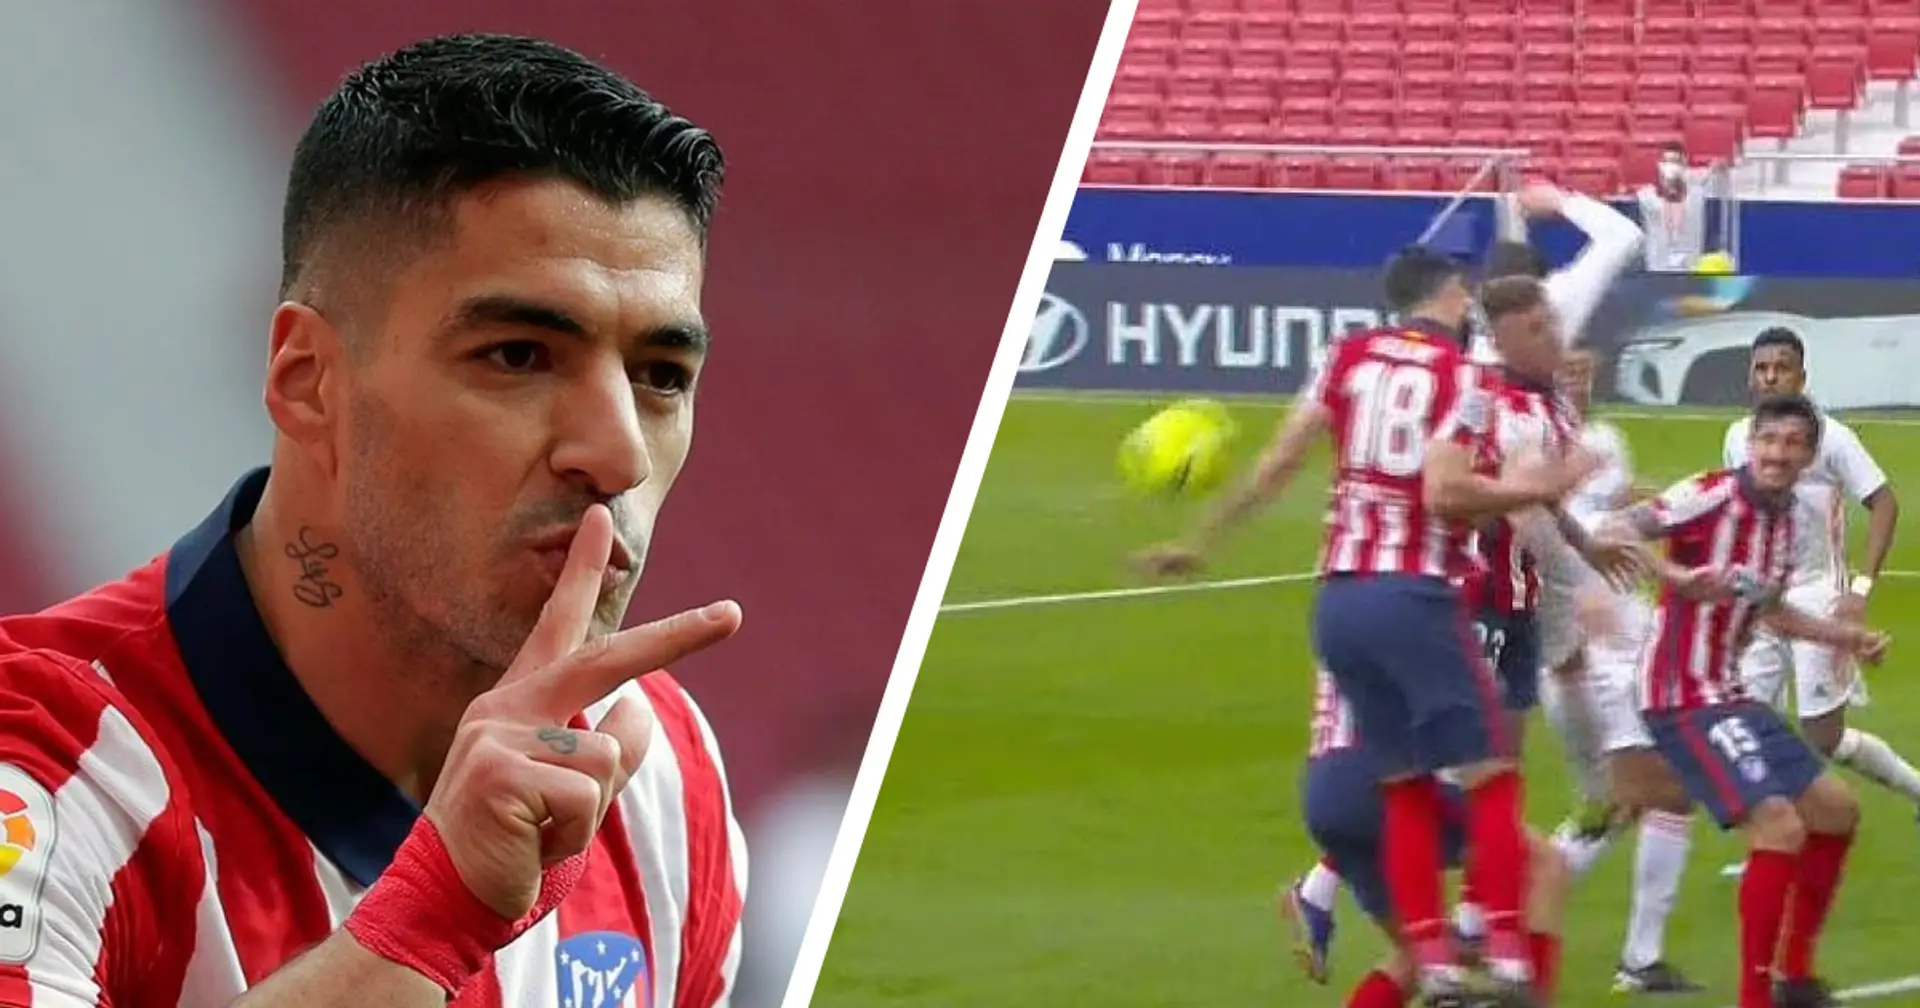 'You're going to complain after last season?': Luiz Suarez on Real Madrid penalty claims